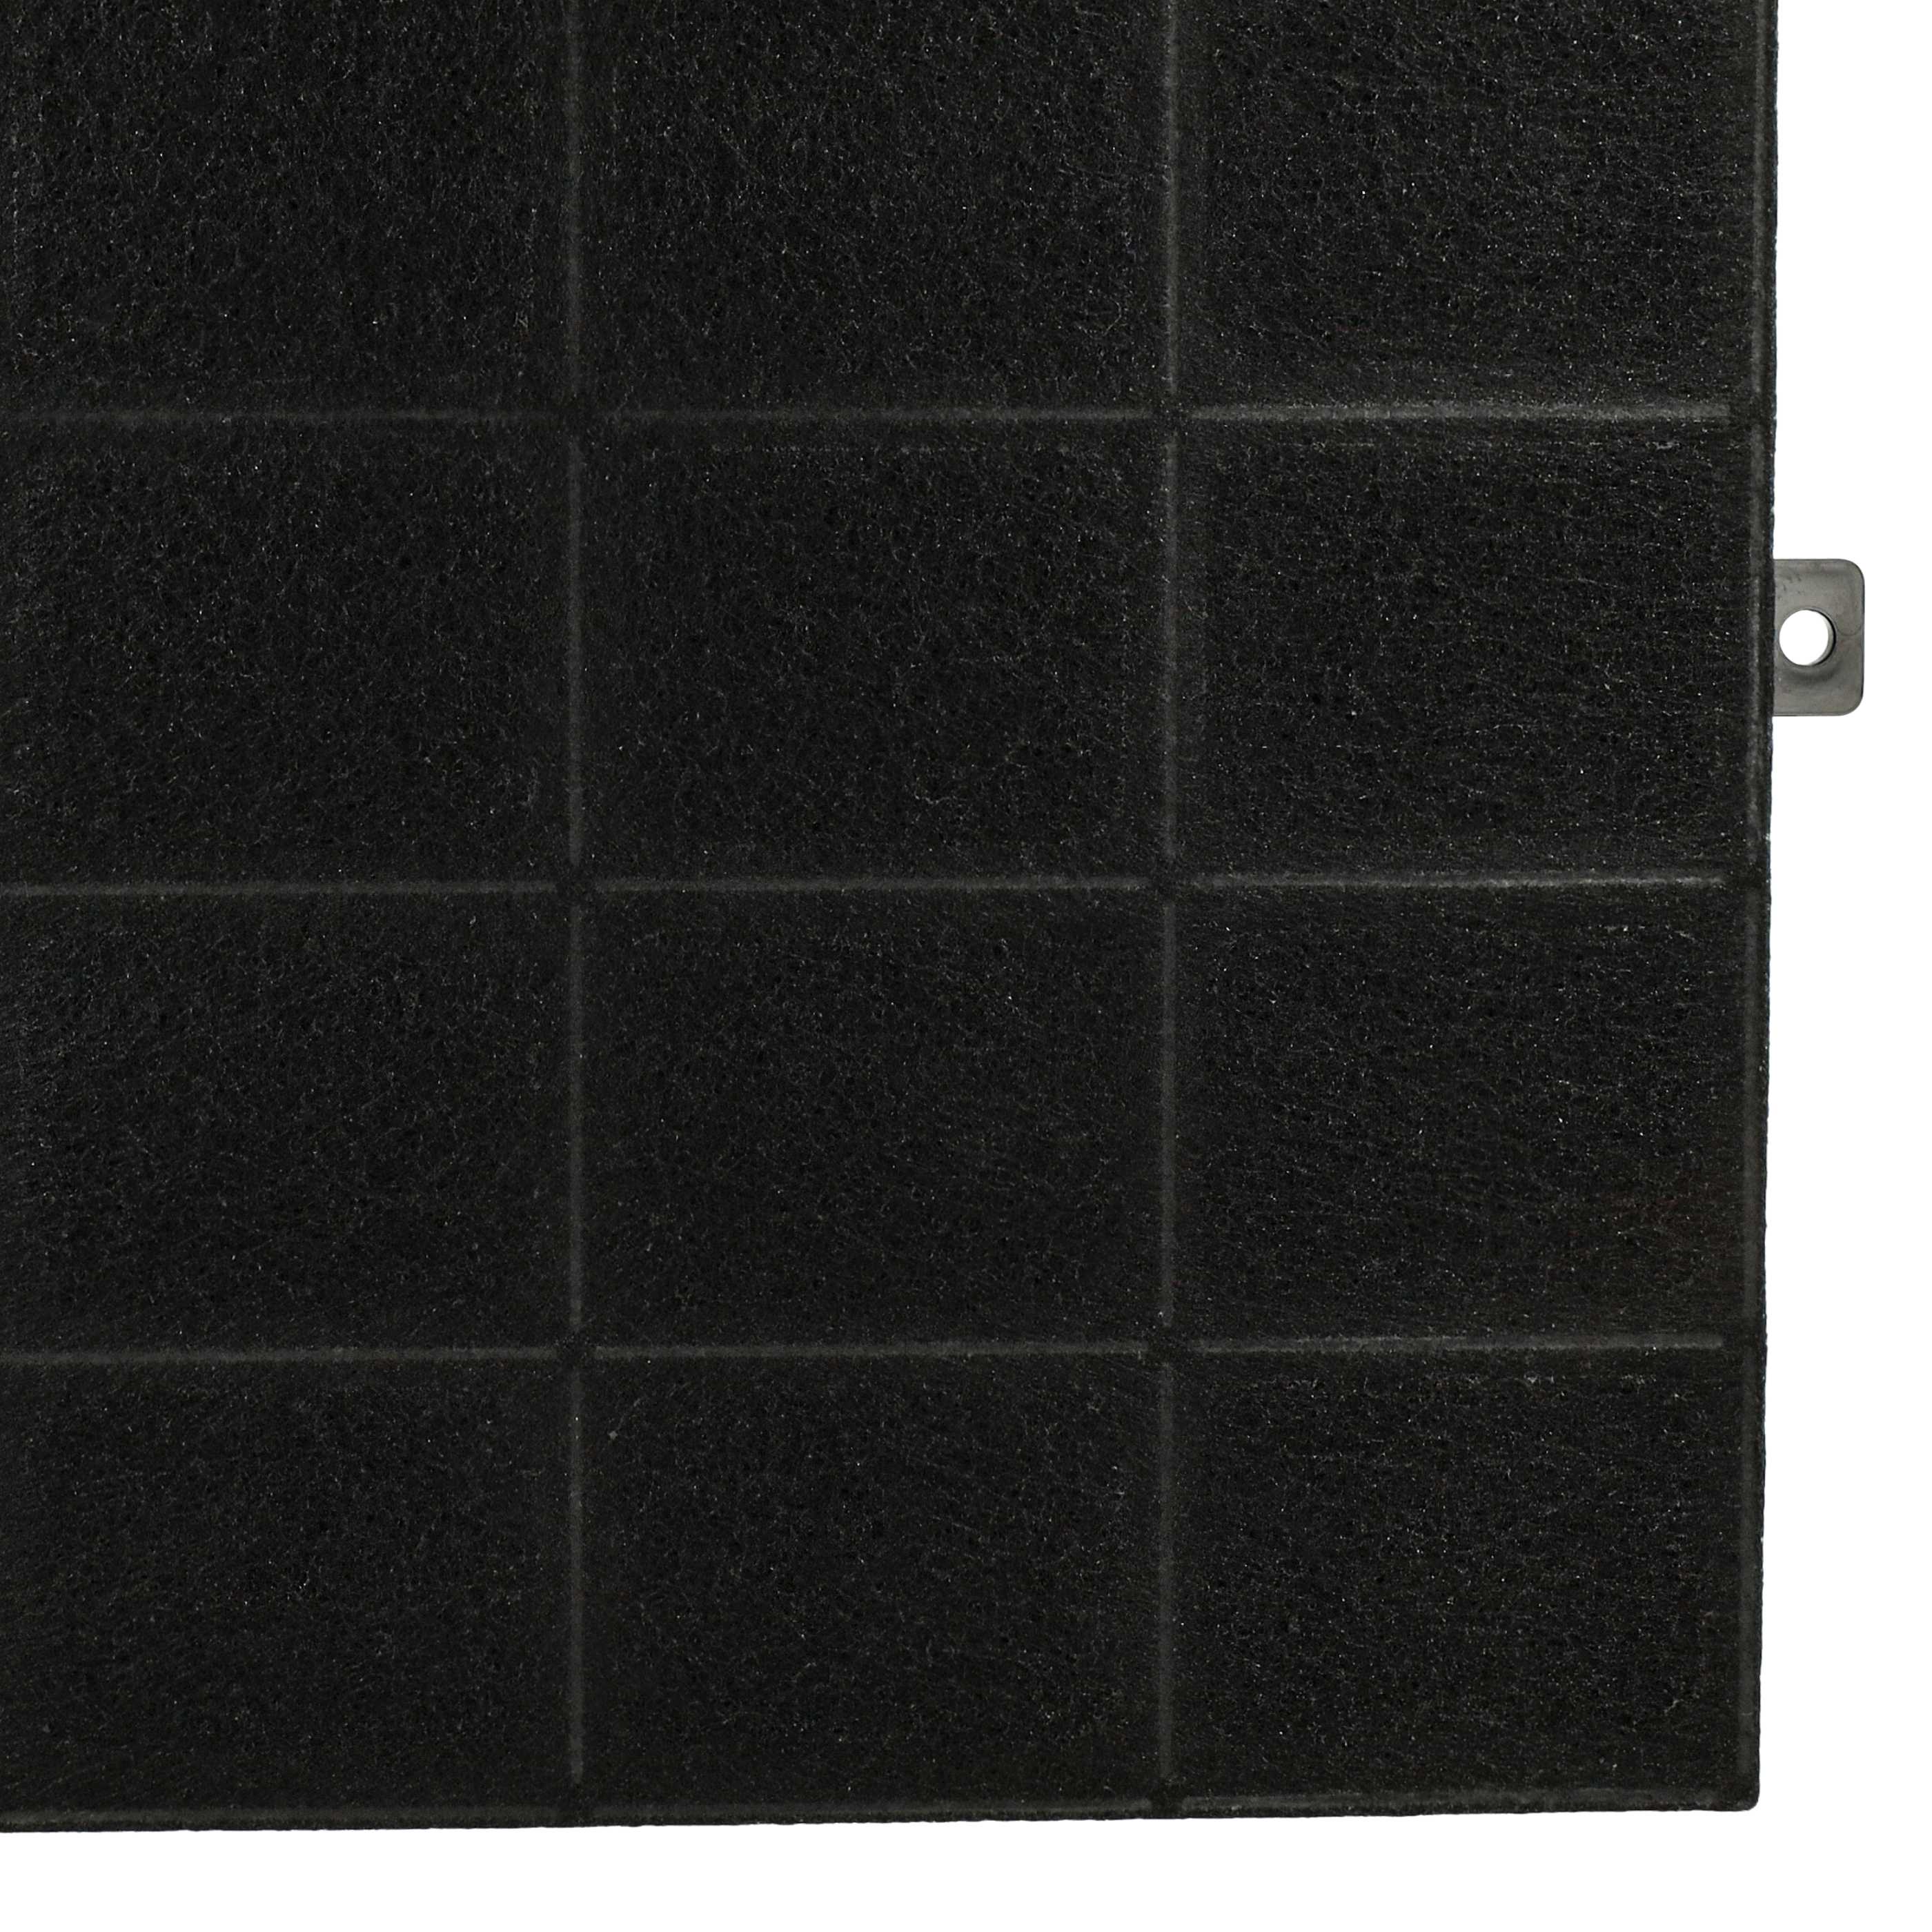 Activated Carbon Filter as Replacement for Gorenje 315275 for Gorenje Hob